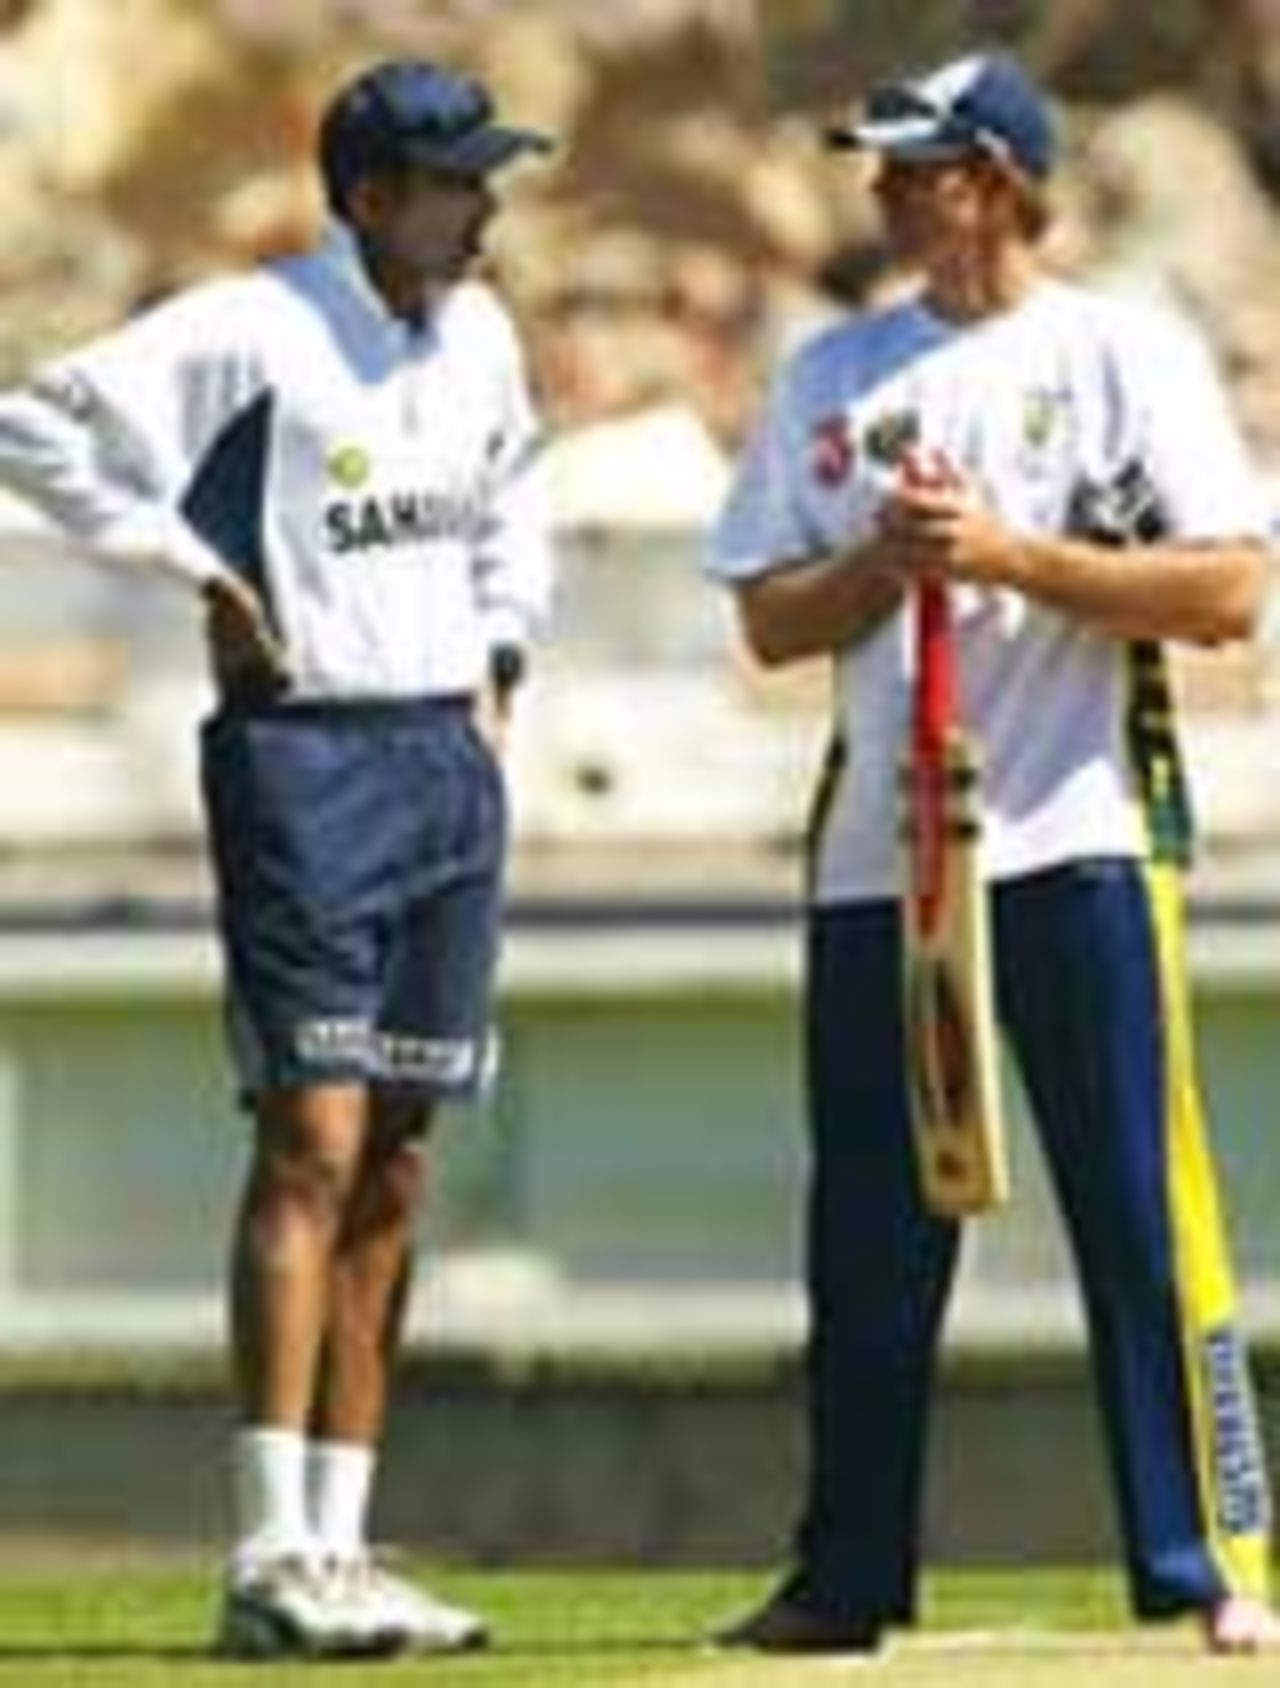 Matthew Hayden and Anil Kumble chat, Melbourne, December 25, 2003